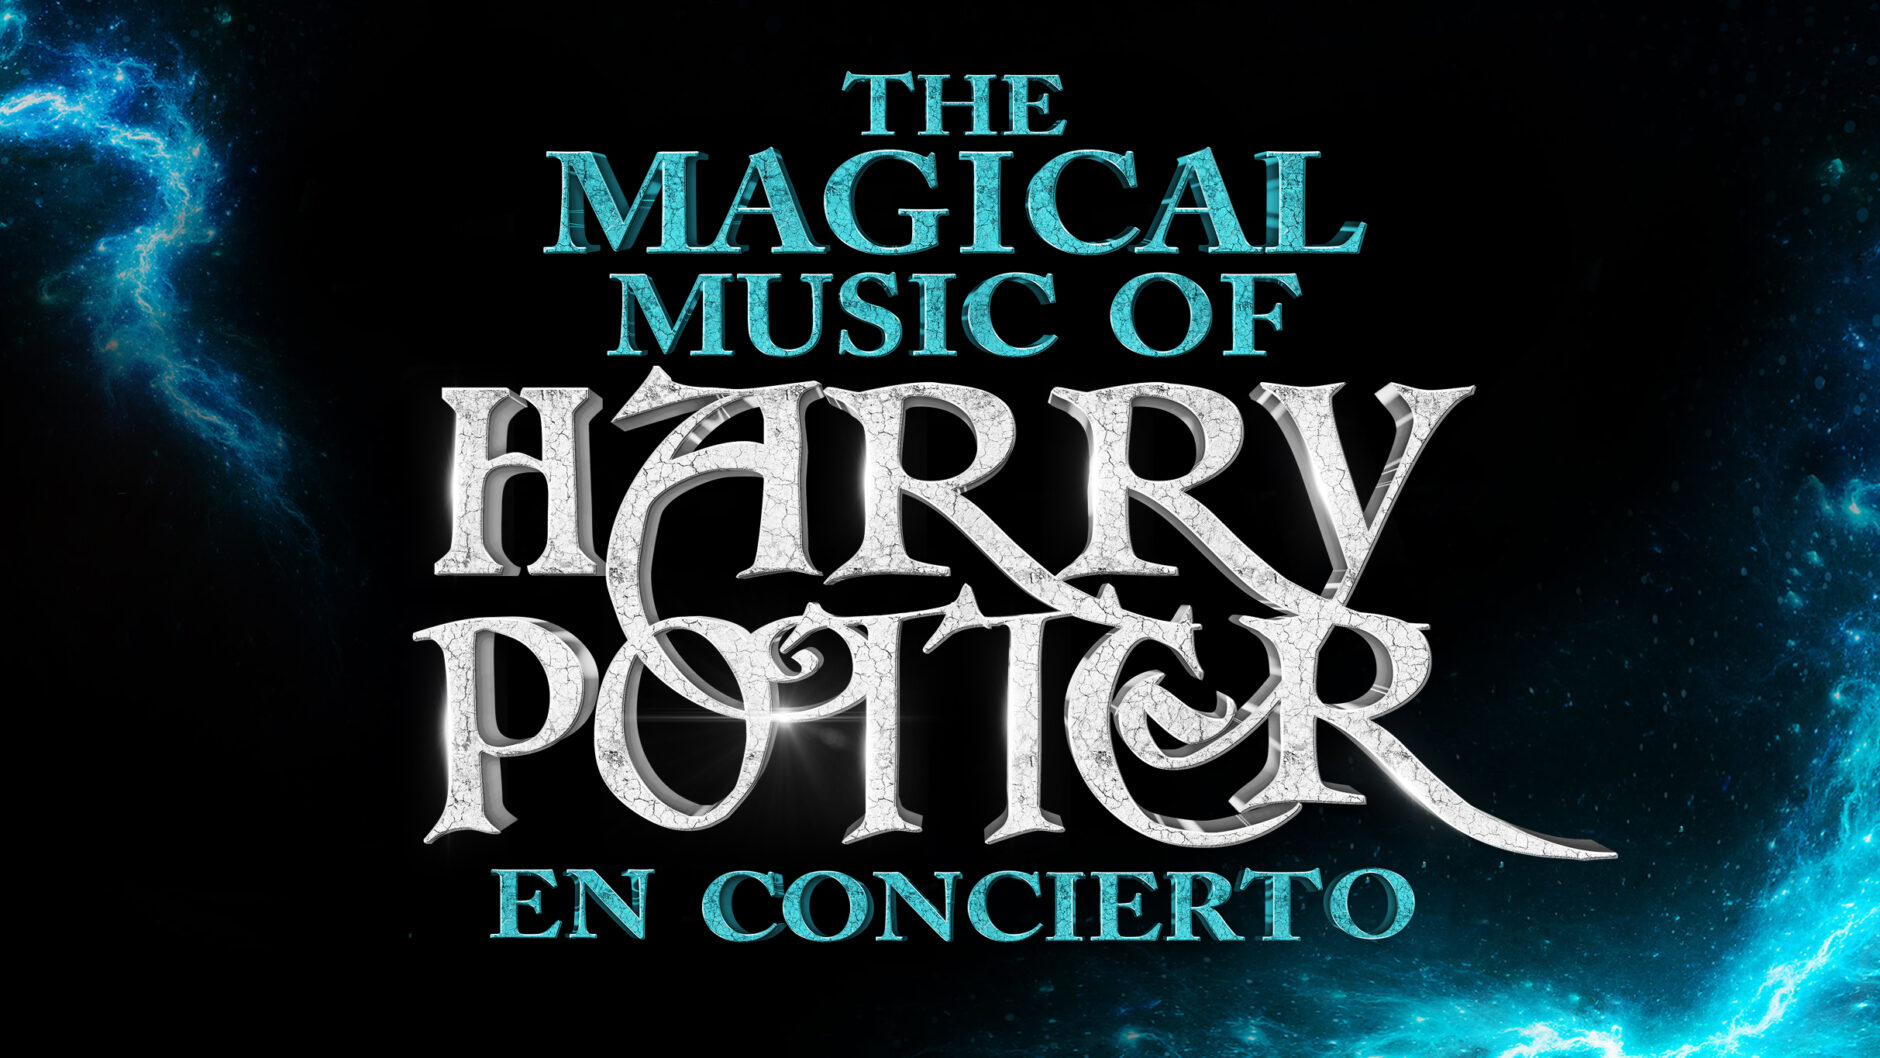 THE MAGICAL MUSIC OF HARRY POTTER 1